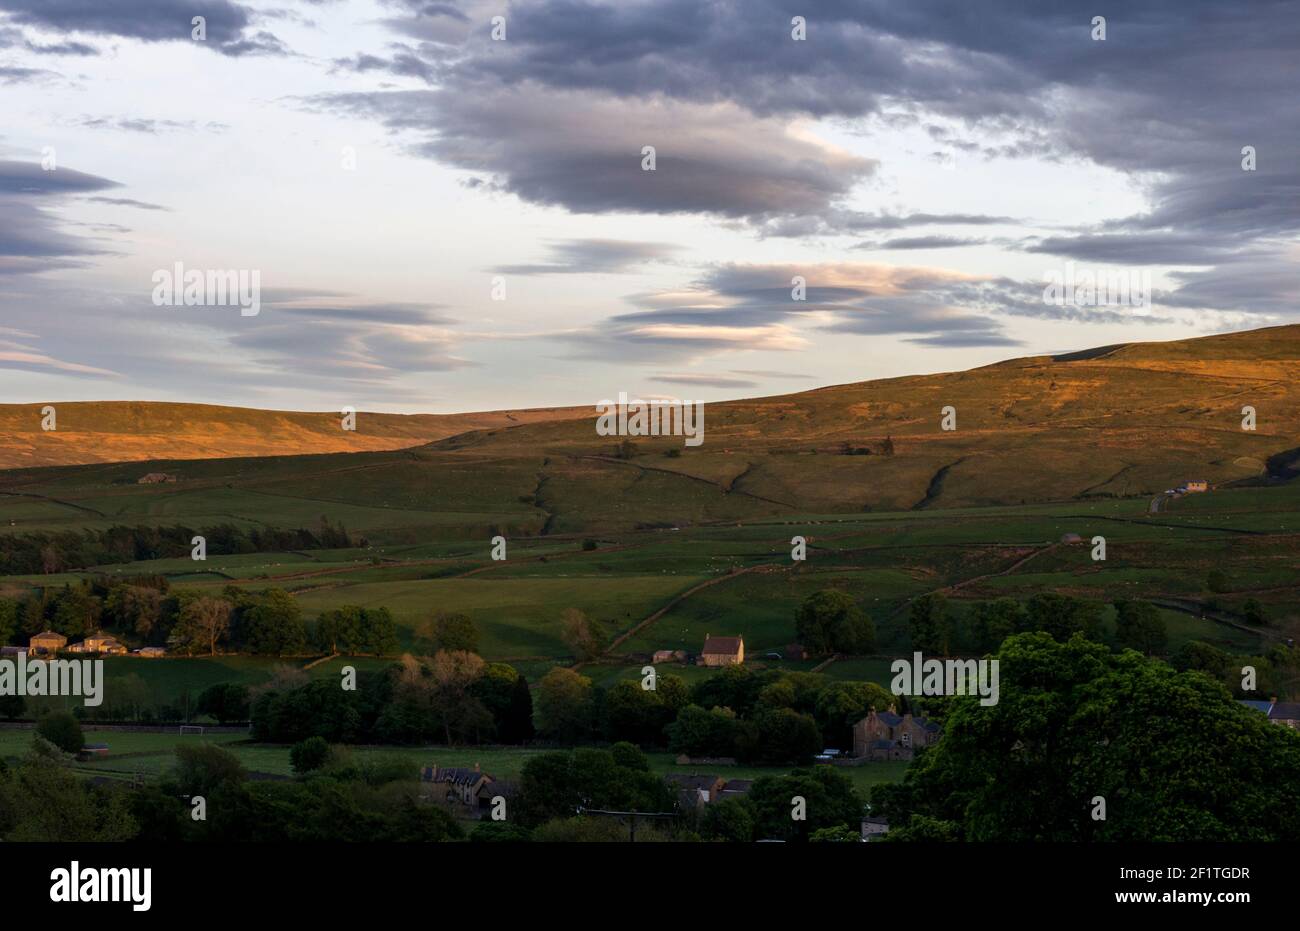 A view of the North Pennine hills, showing the village of St John's Chapel, Weardale, County Durham, UK in evening, spring sunshine Stock Photo